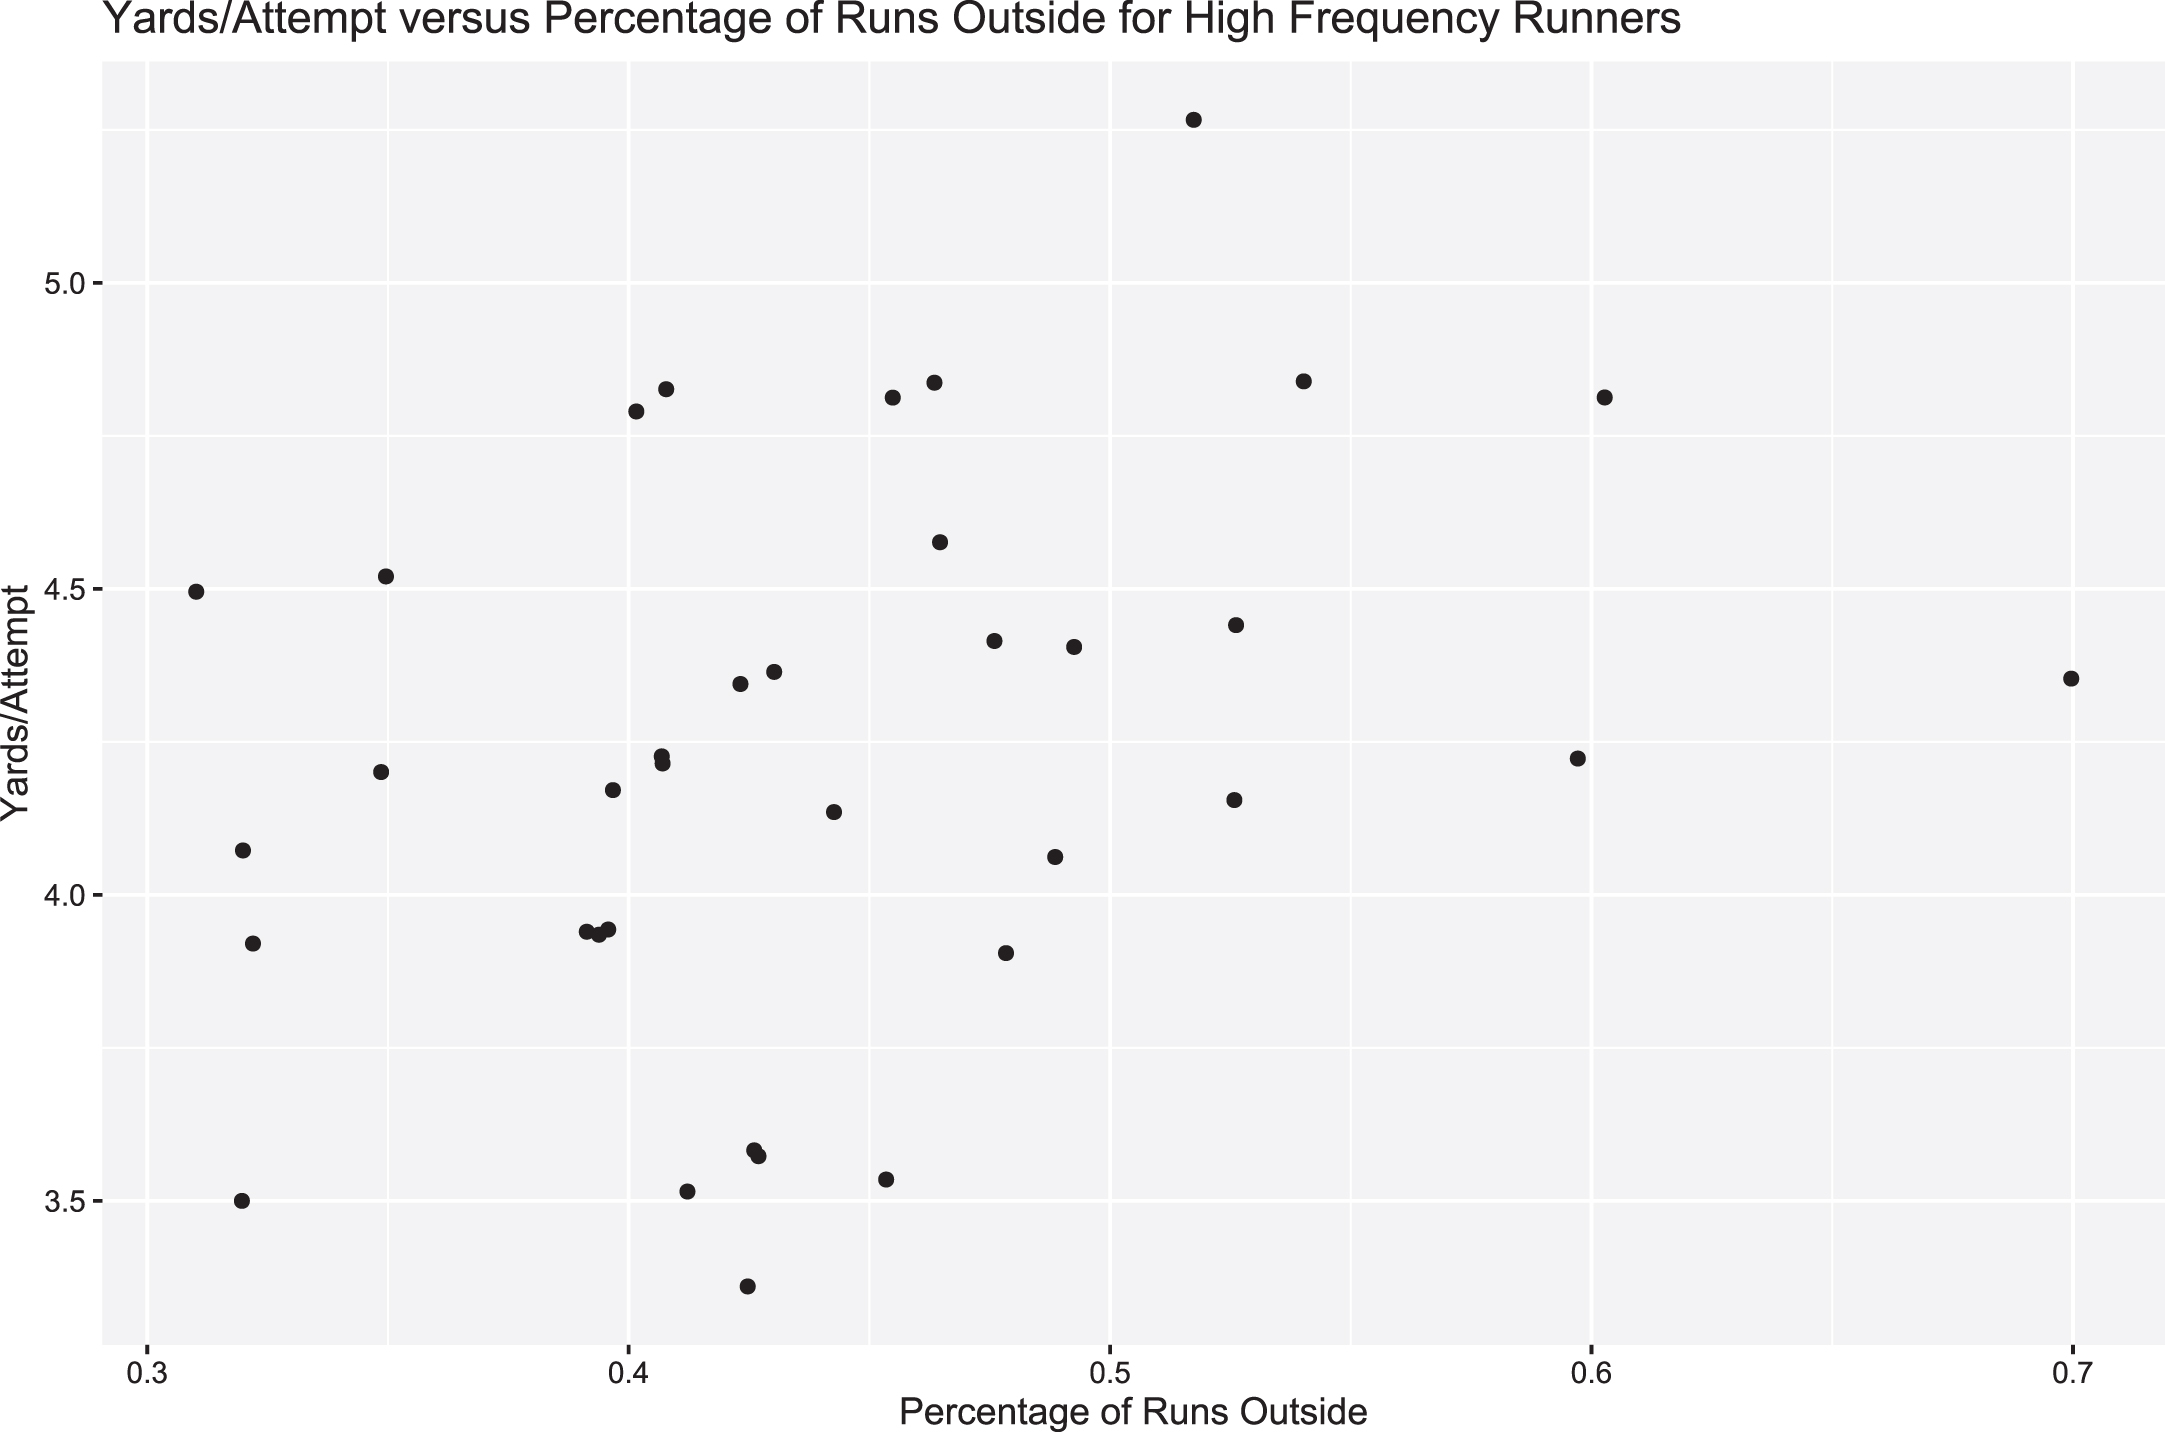 Scatterplot of yards per attempt versus percentage of runs to the outside for individual runners, specifically for each team’s primary runner, showing a positive correlation in between the variables of interest.